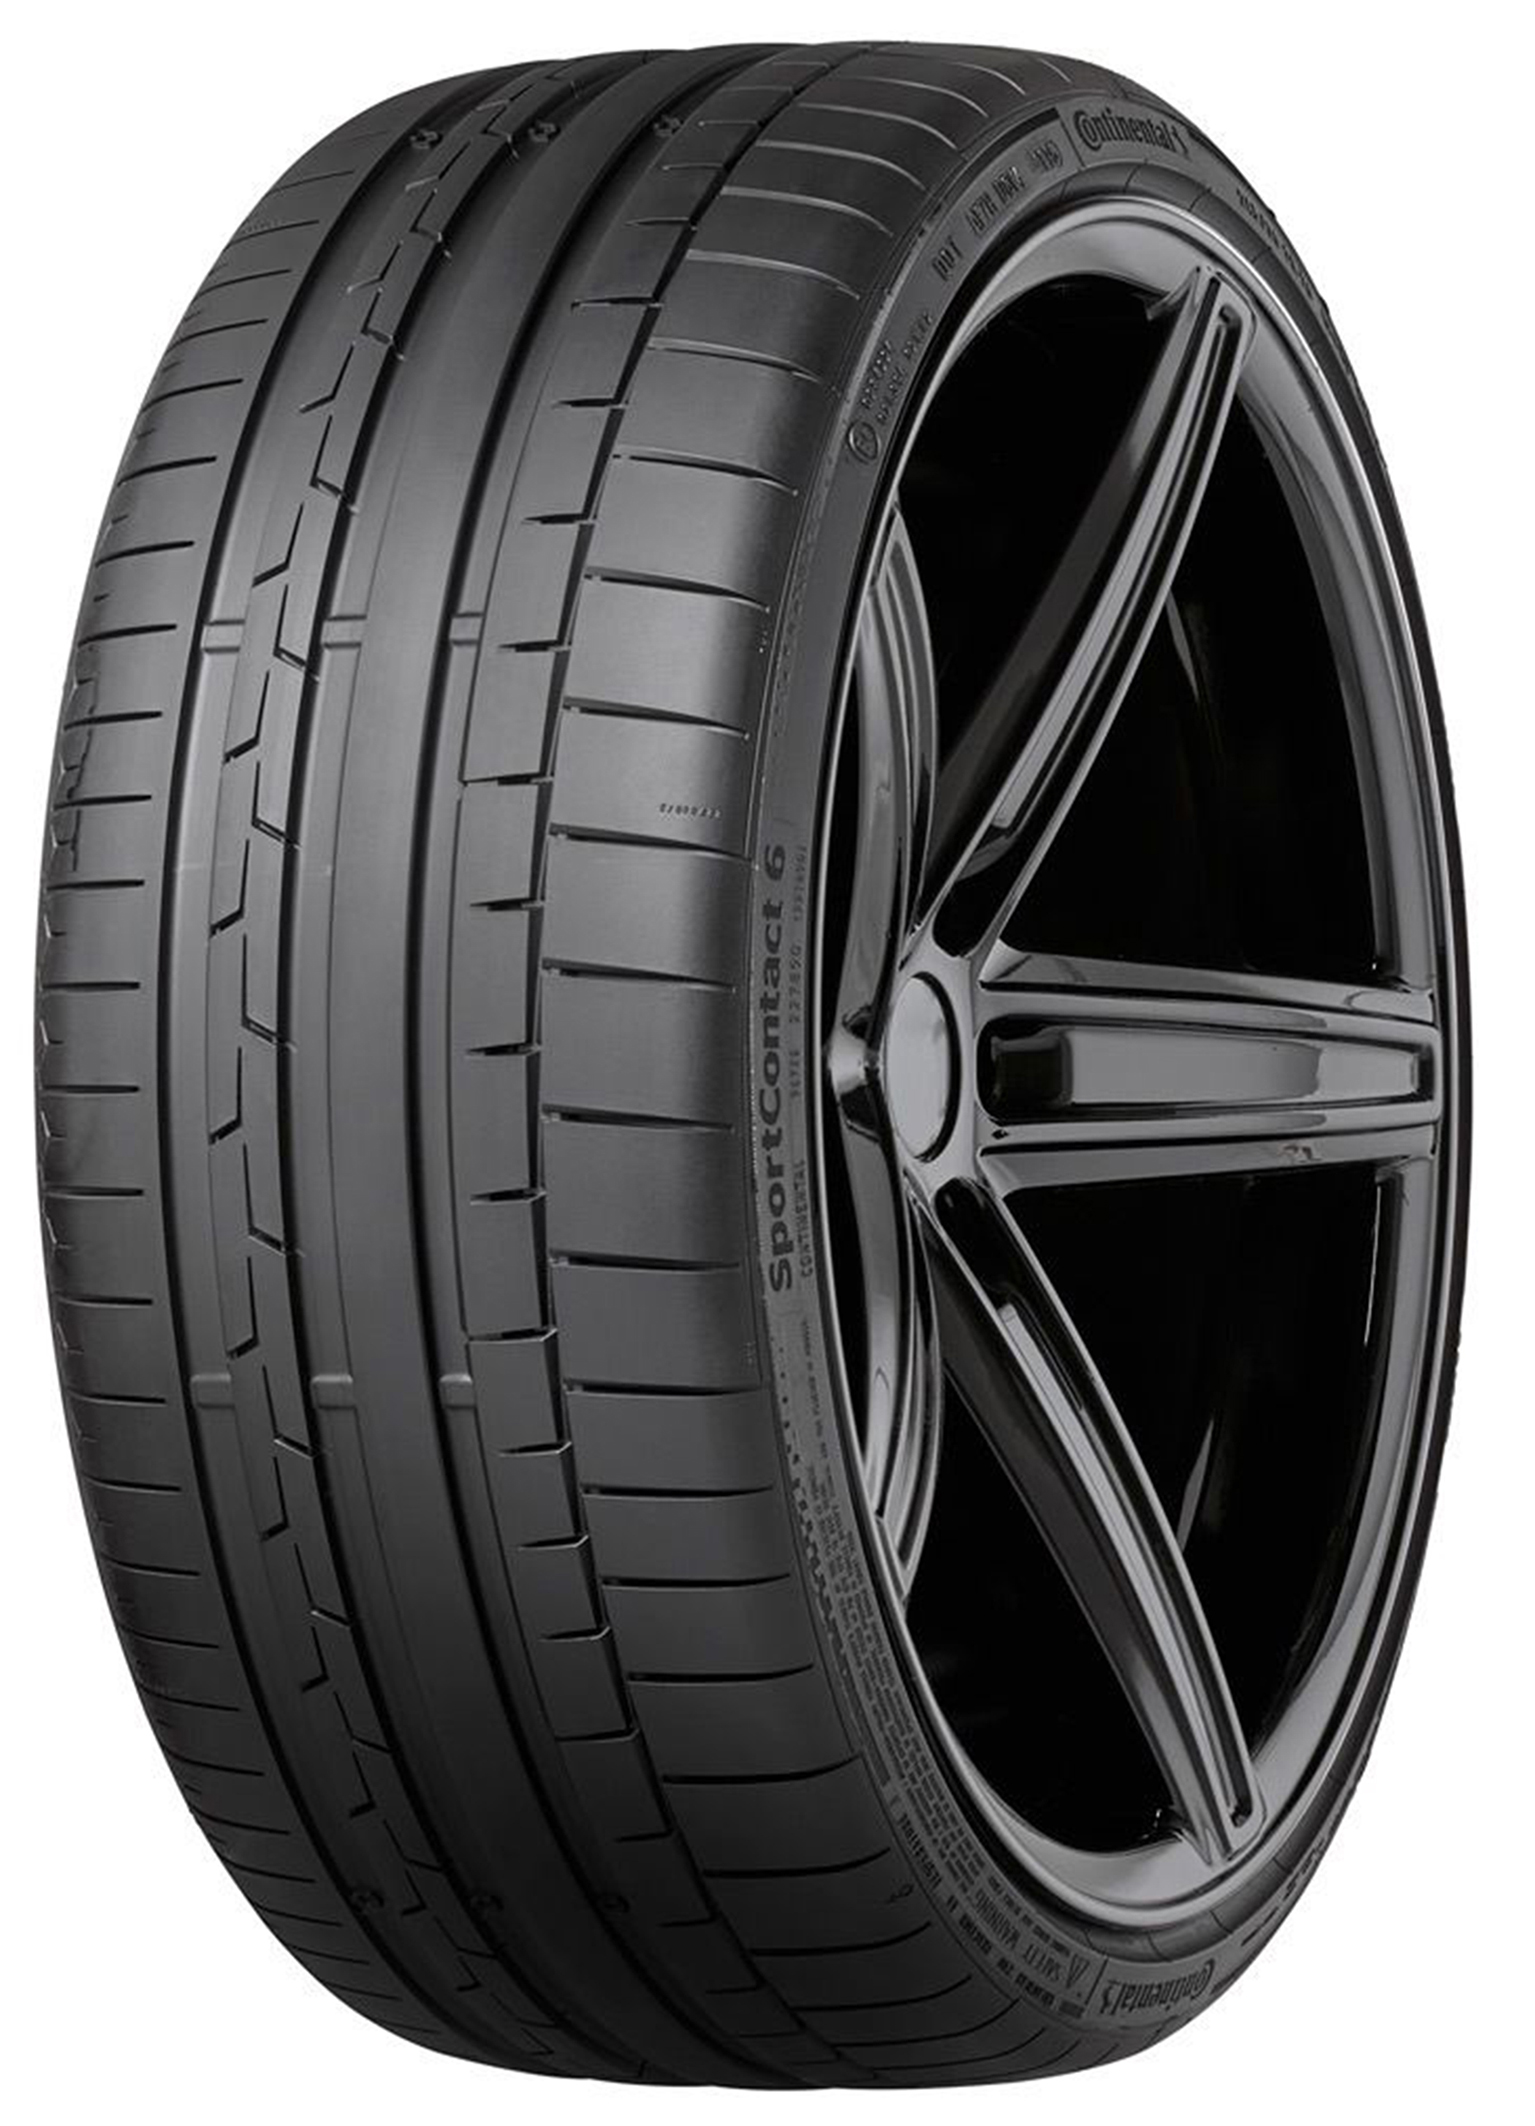 - AG Factory-fitted from Tires M4 Continental BMW New Continental – with